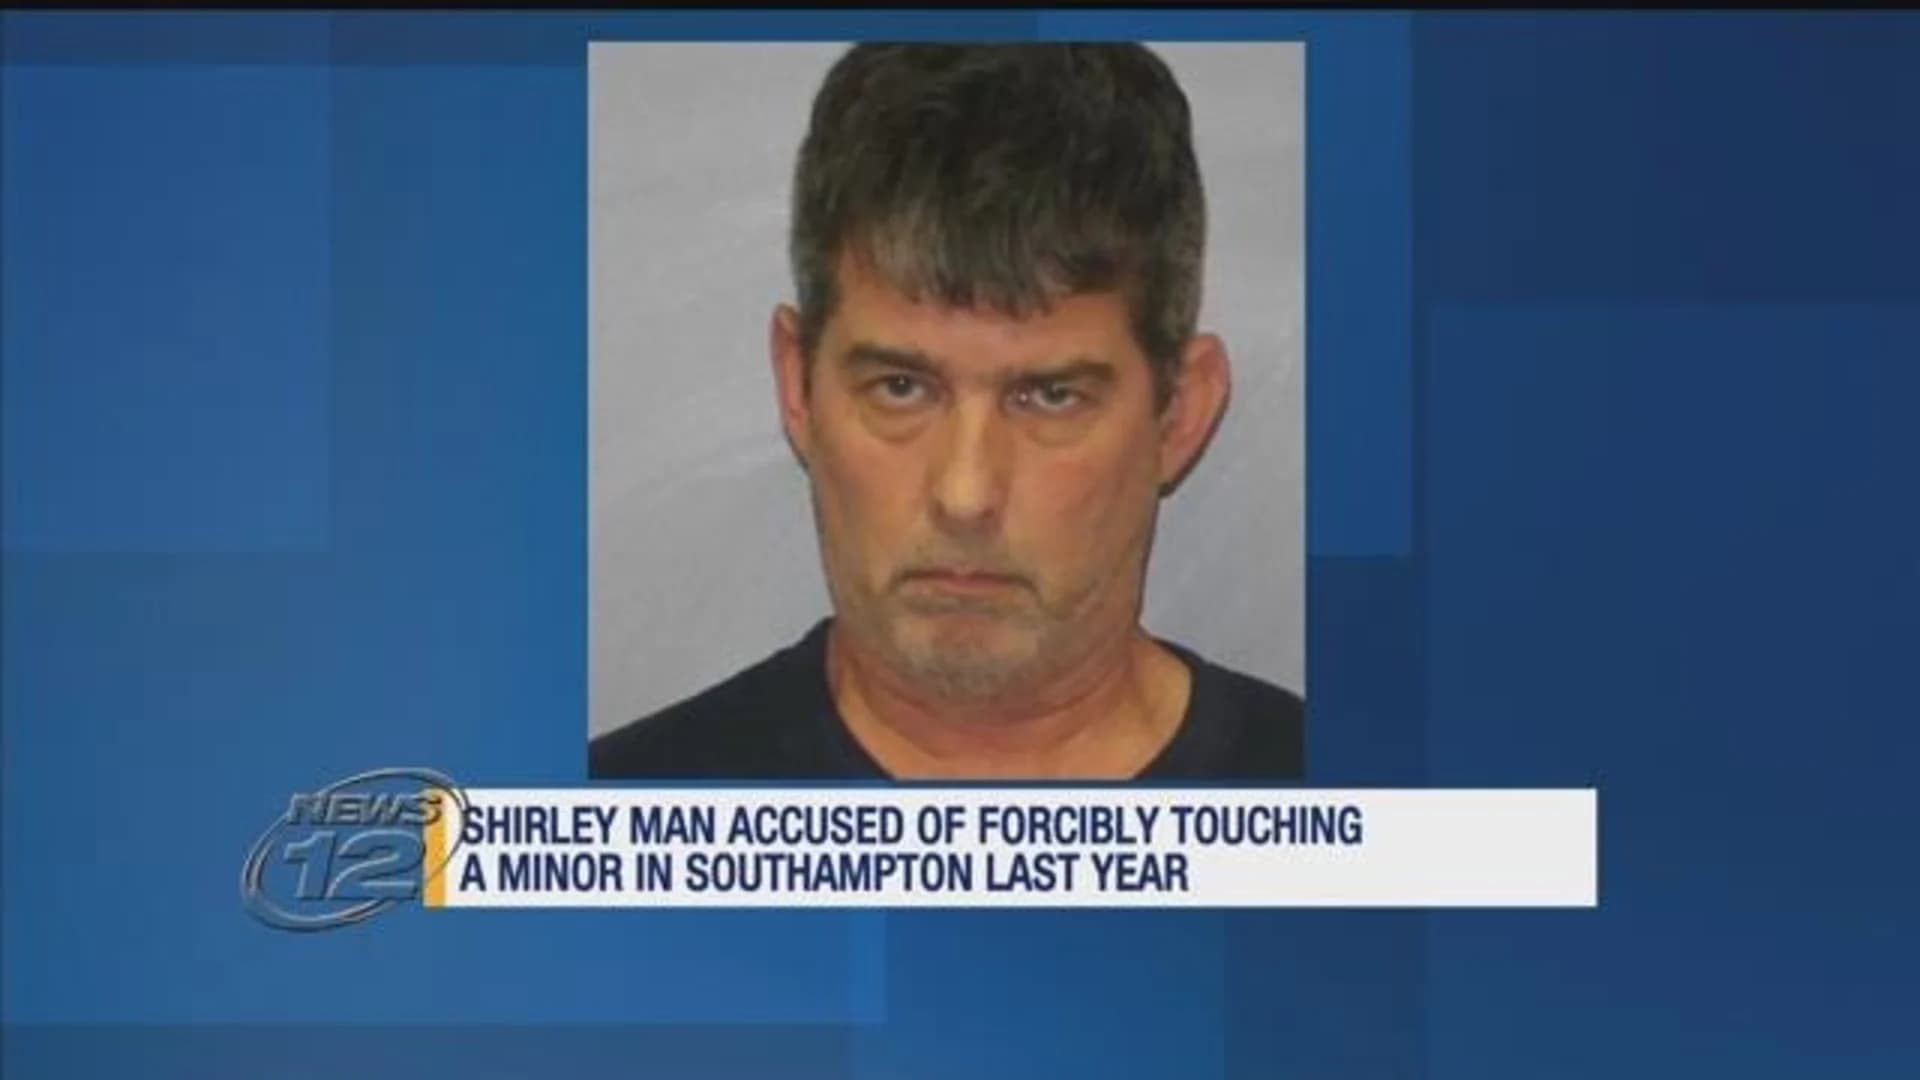 Shirley man accused of forcibly touching a minor